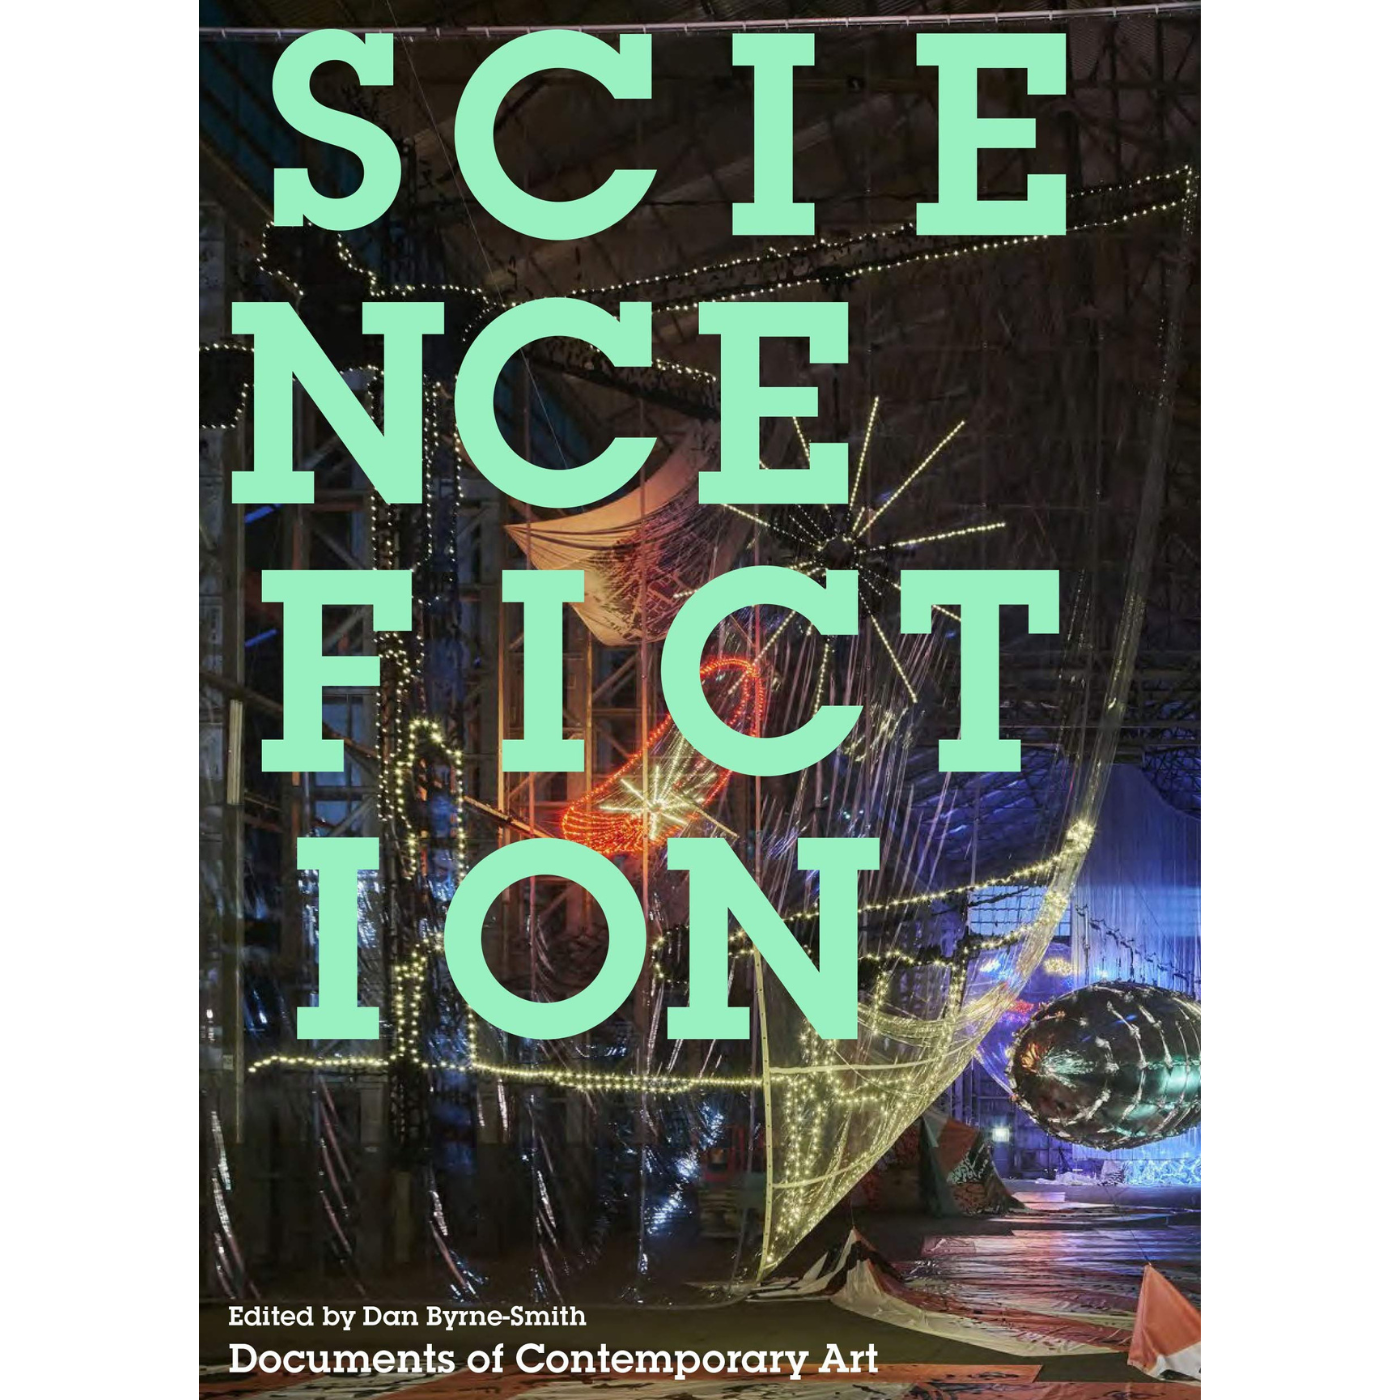 Science Fiction: Documents of Contemporary Art